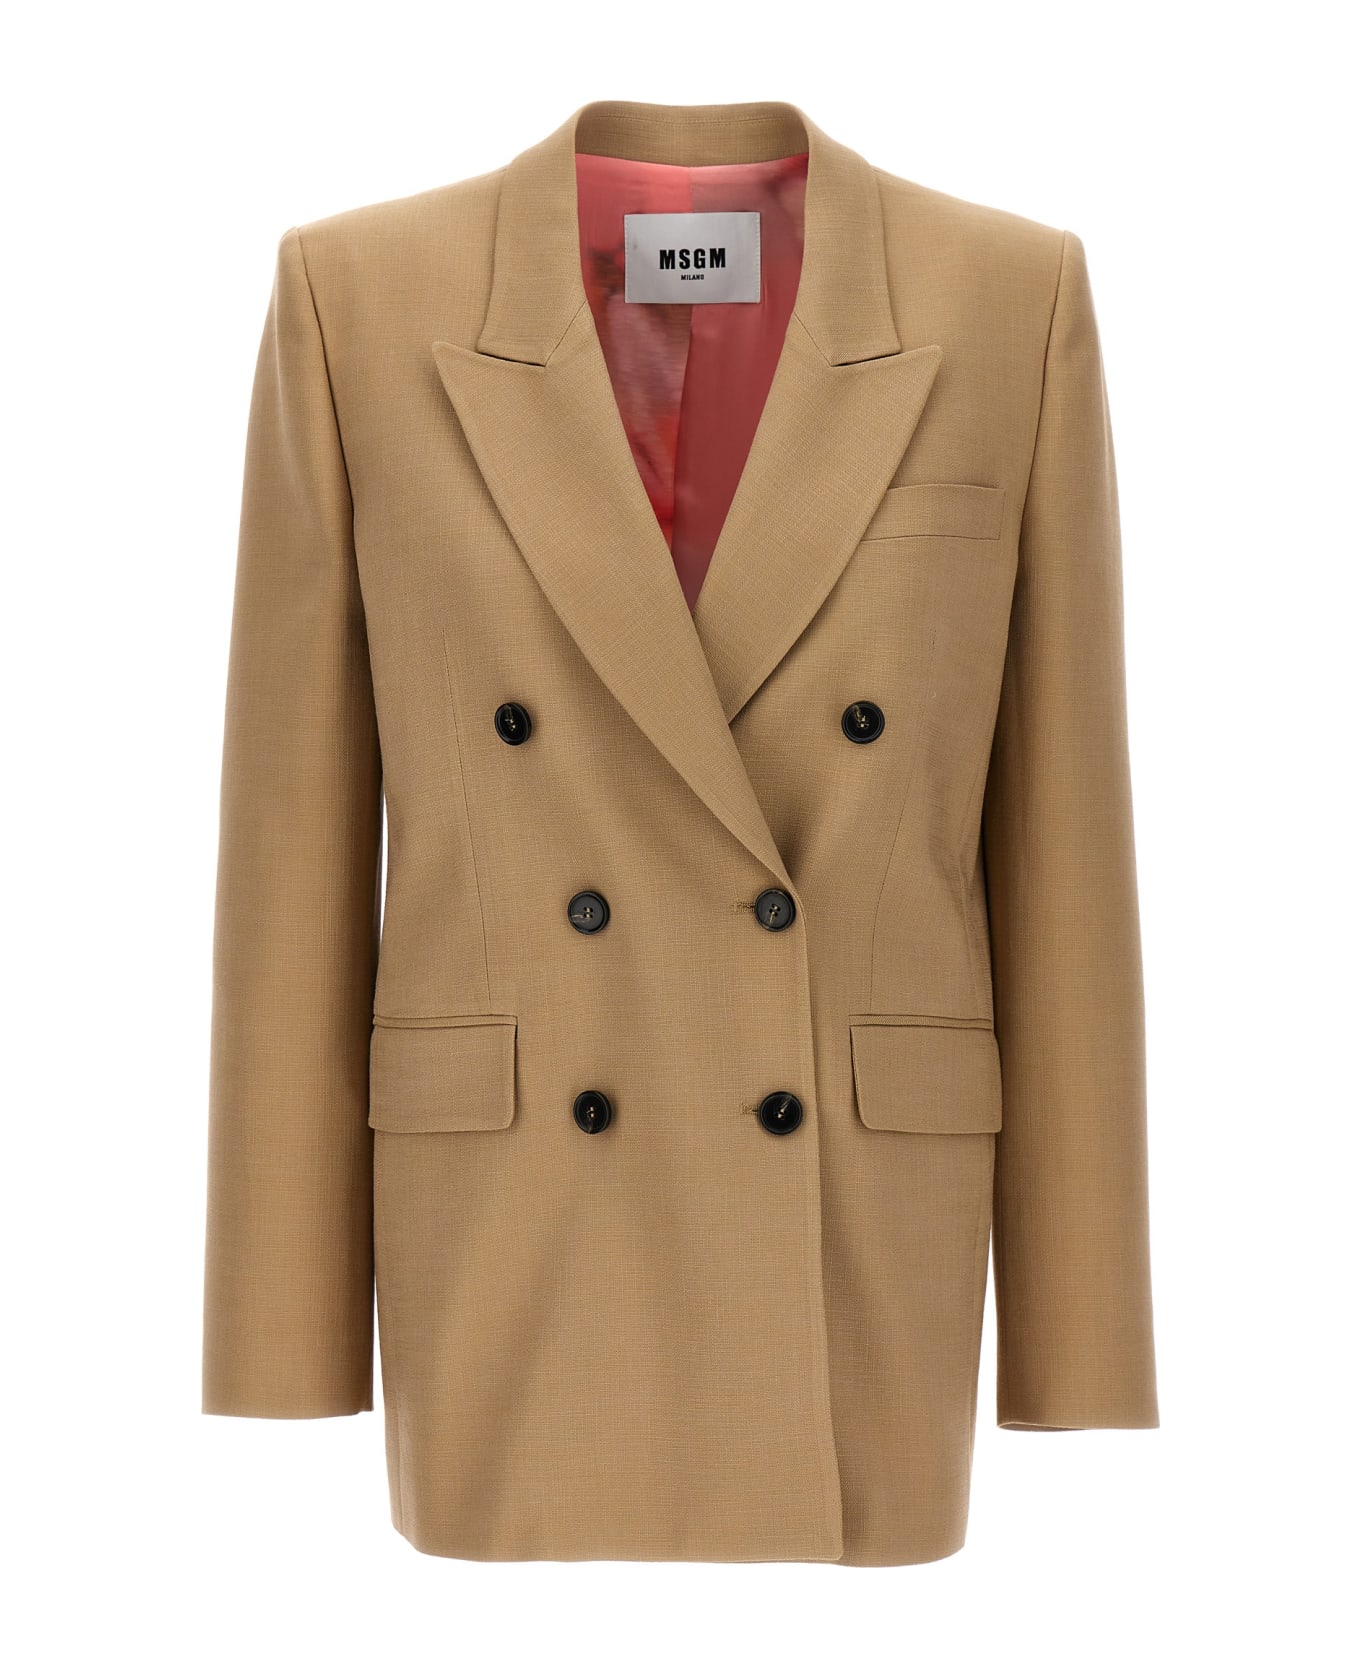 MSGM Double-breasted Blazer - SAND